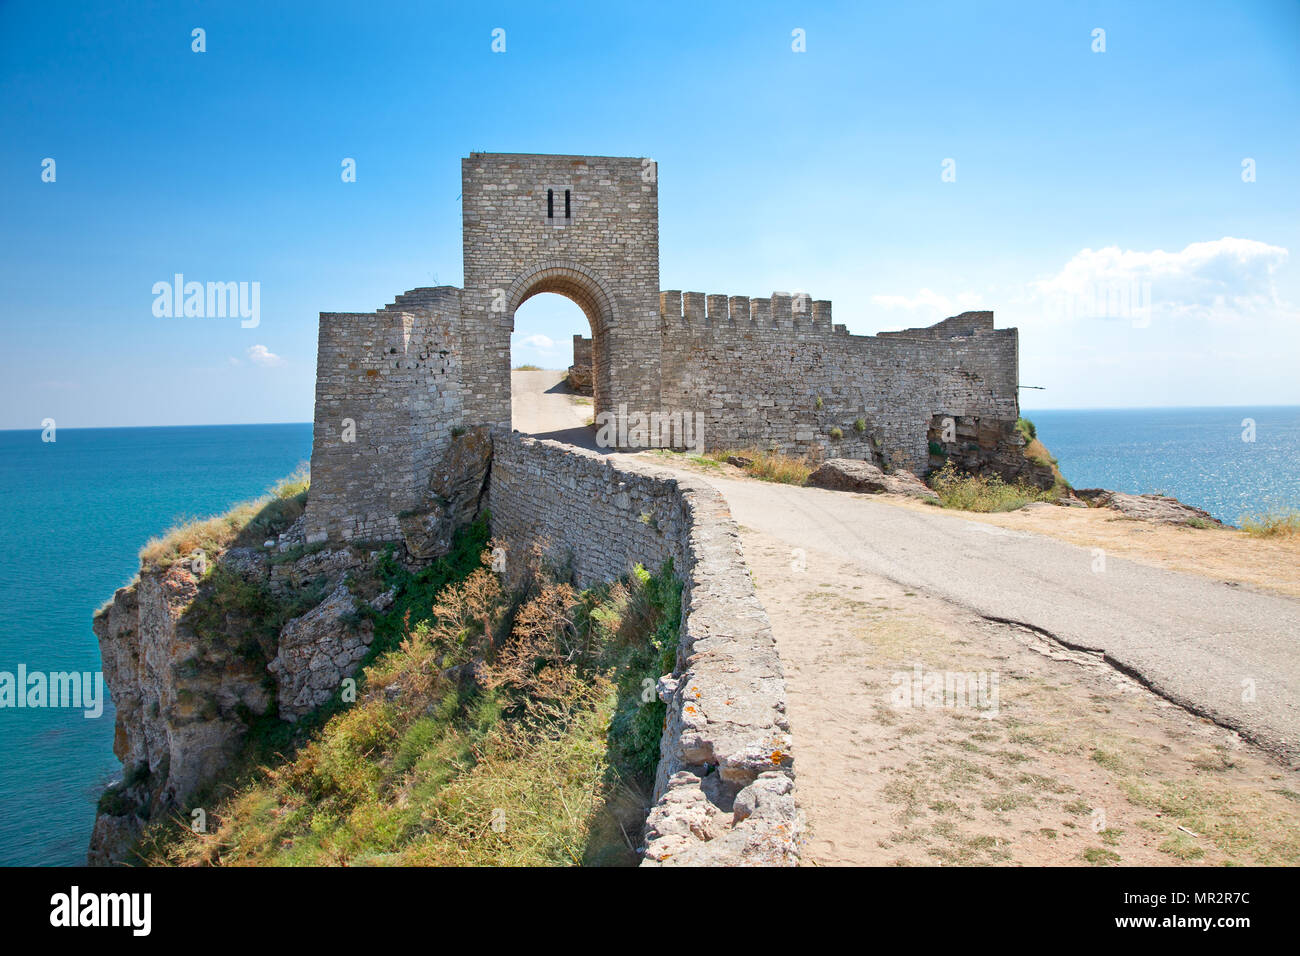 Oldl gate guarding the entrance in the medieval fortress on cape Kaliakra, Bulgaria. Stock Photo